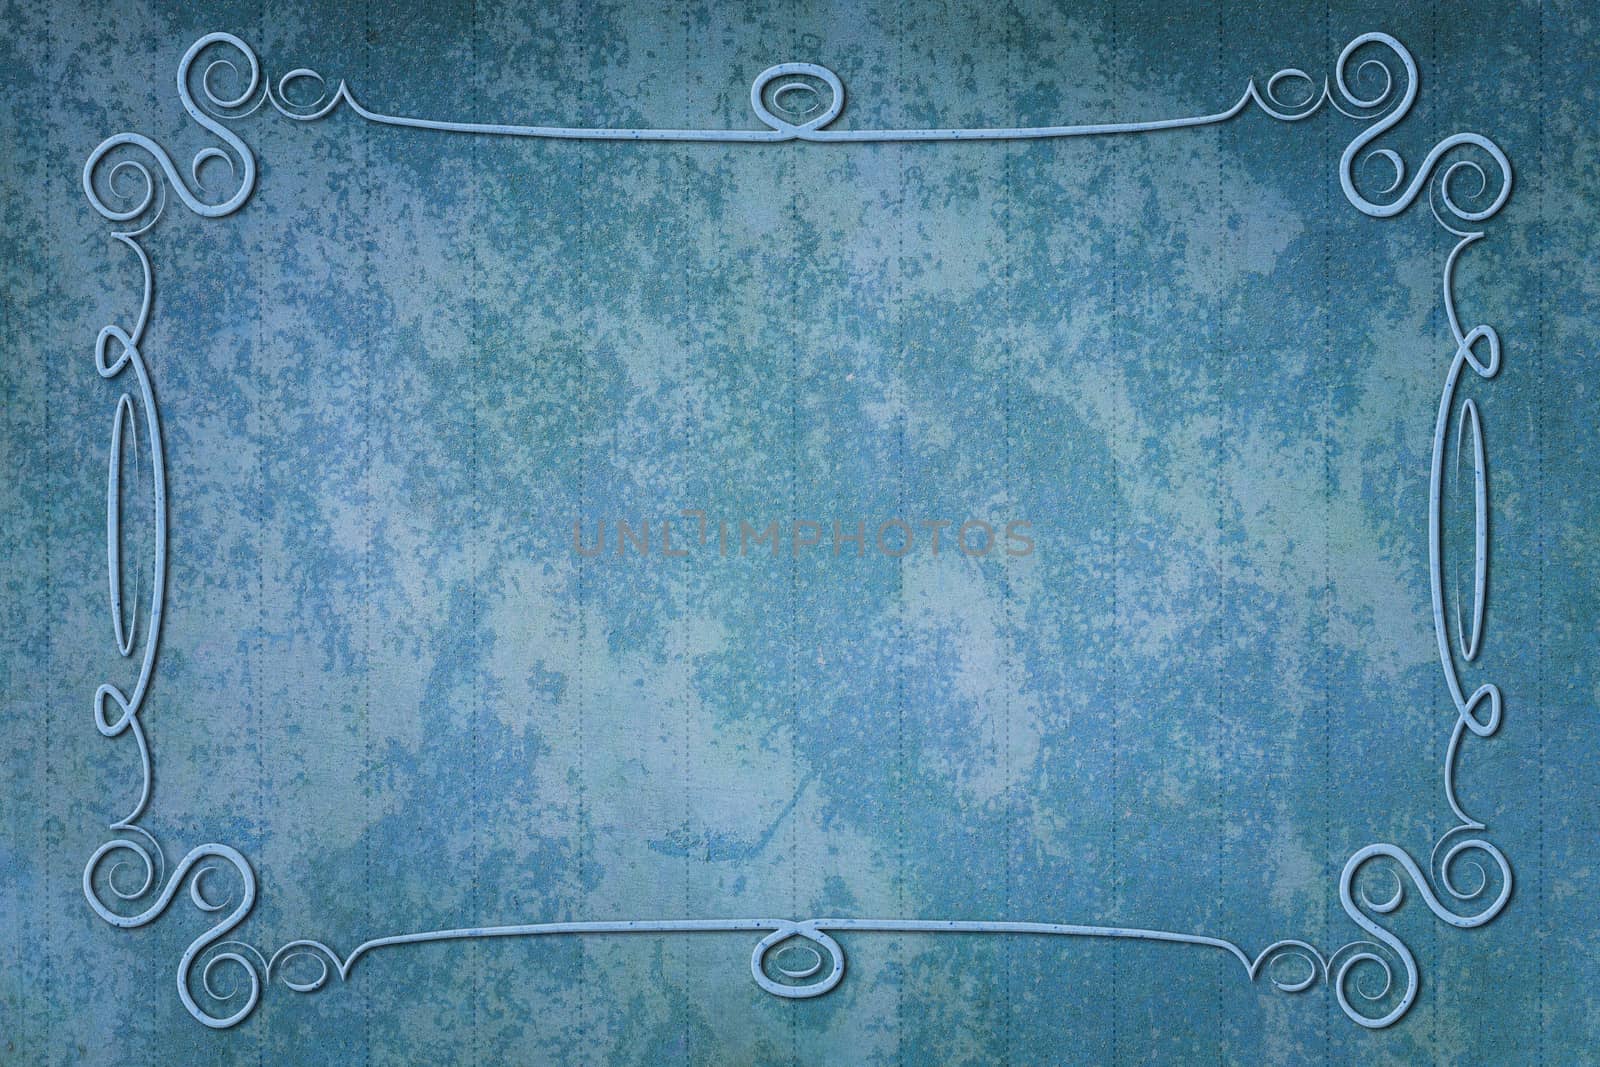 An antique decorative frame with a background with texture and vertical dash lines. Blue color